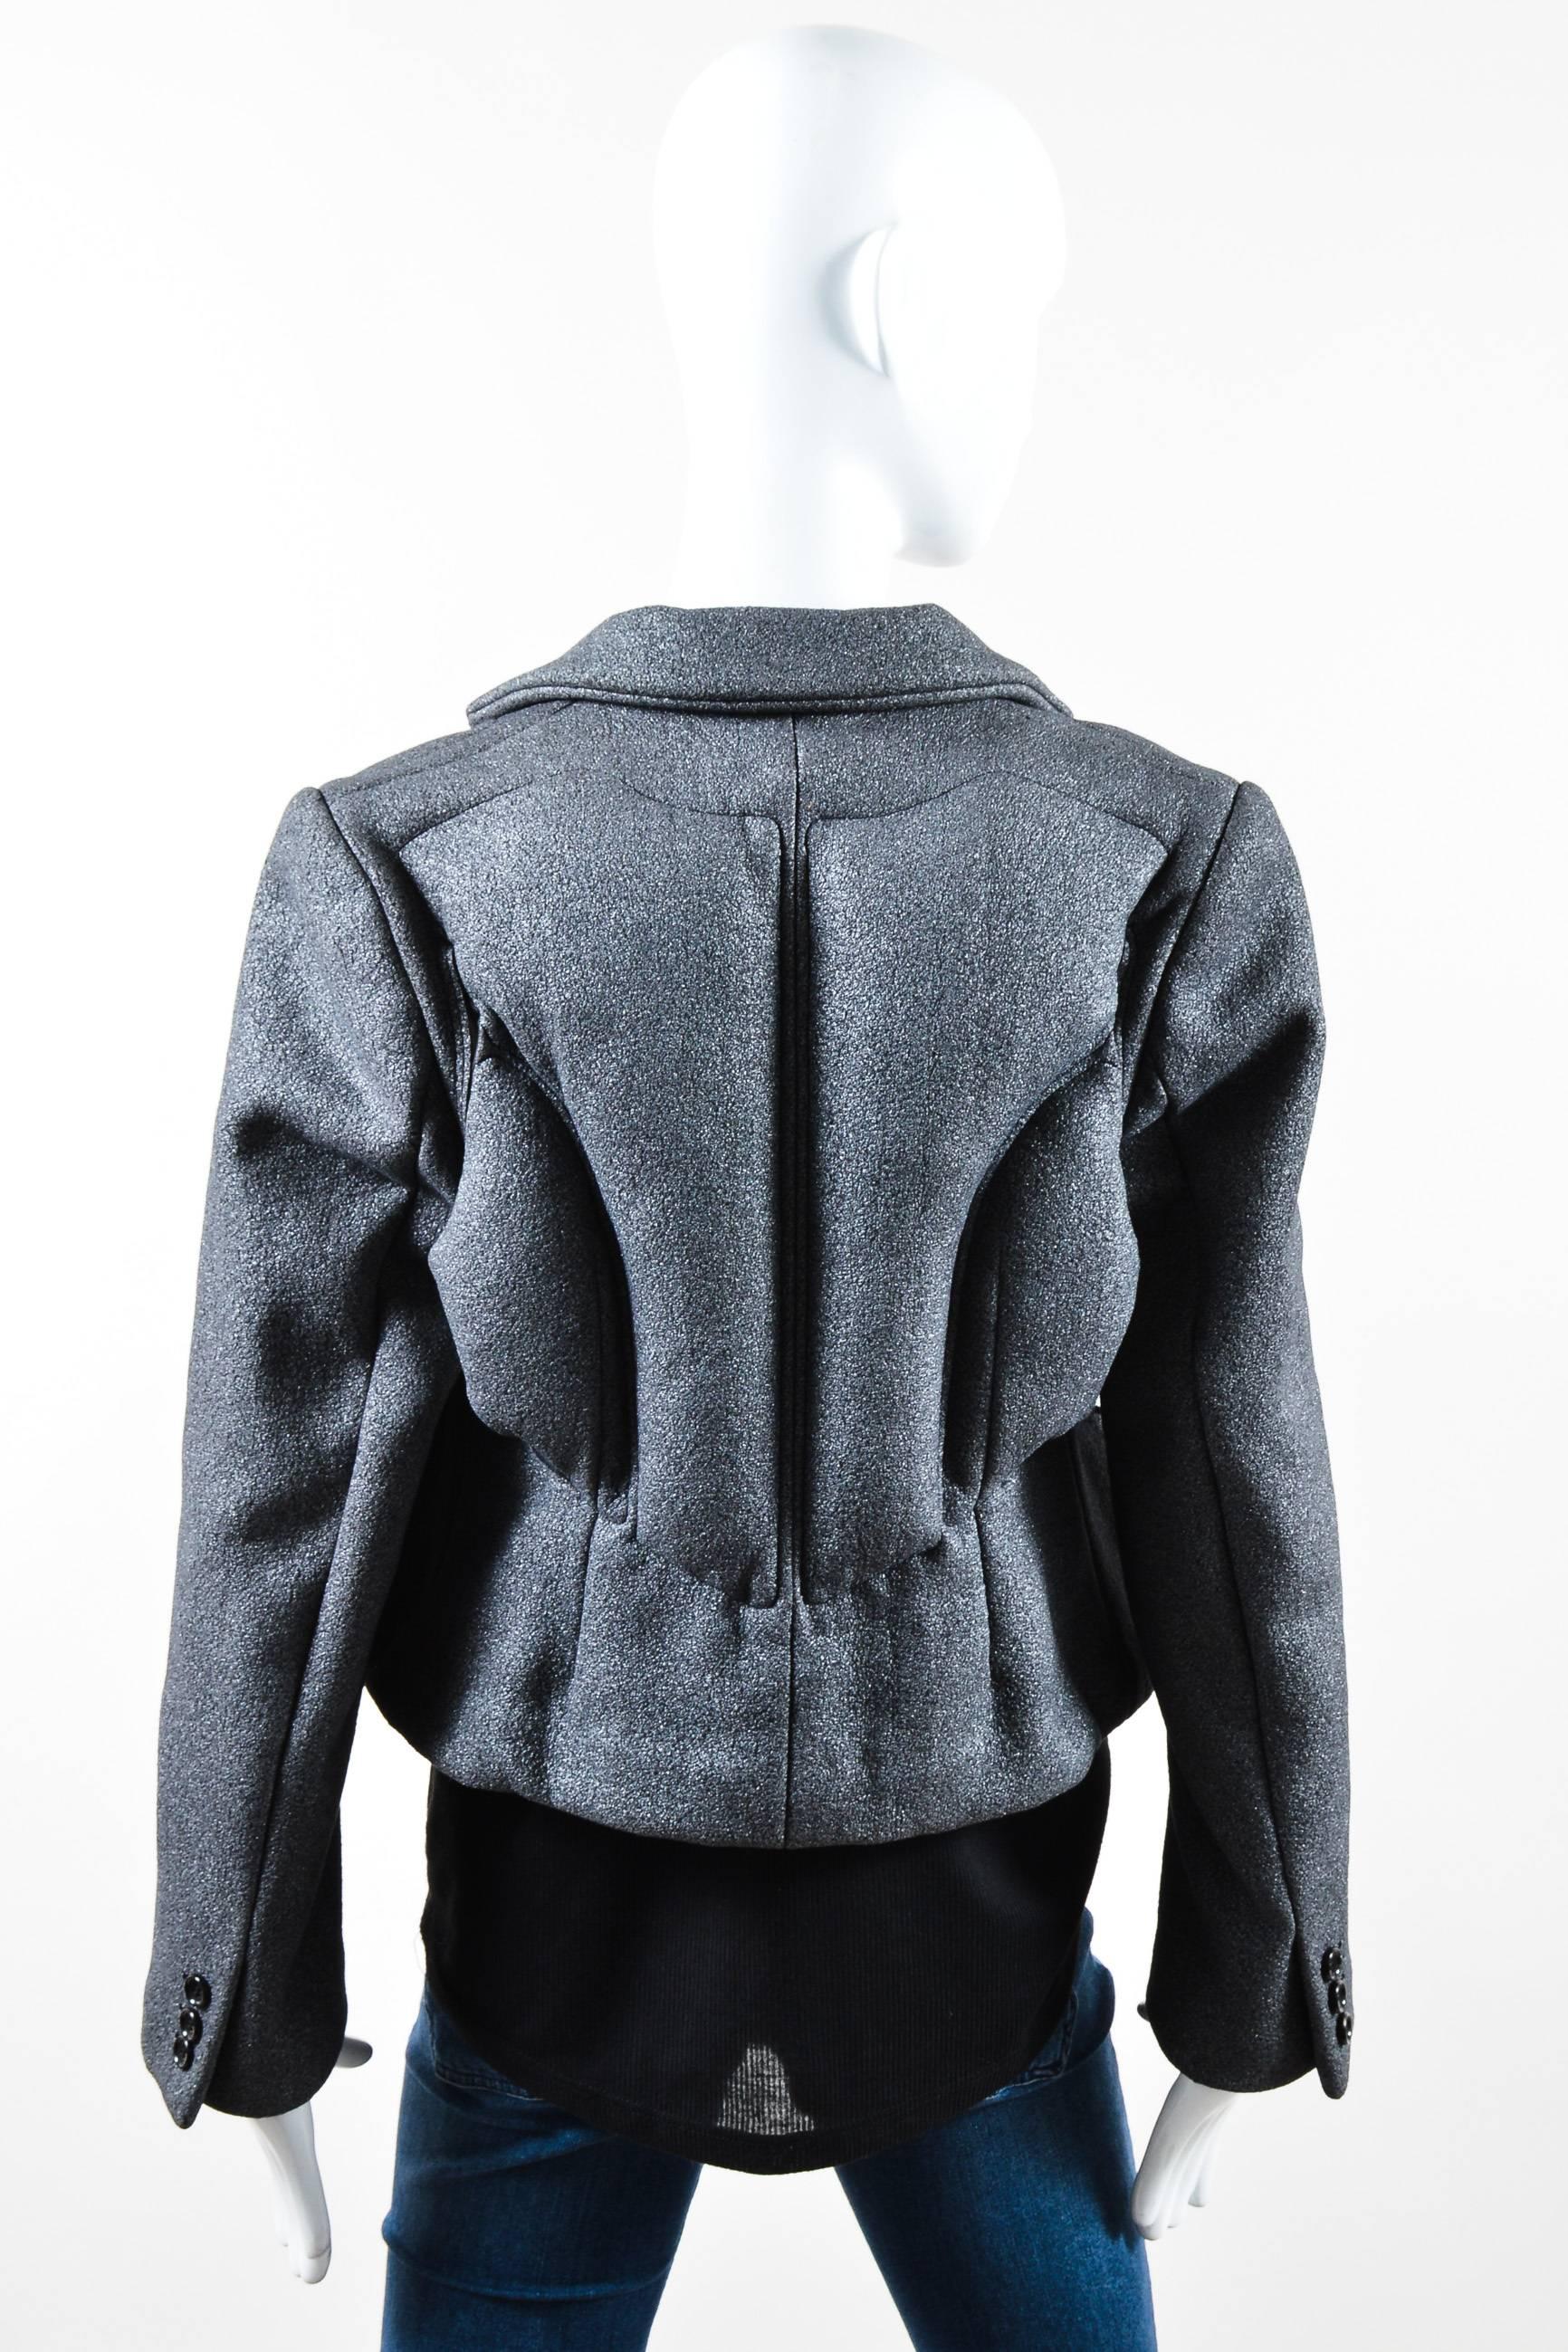 Gray jacket with metallic glitter. Long sleeves. Notch collar. Lightly padded with heavy padding on back. Cut out slits at sides and on back with zip pockets on interior. Buttons at ends of sleeves. Buttons up front. Lined.

Additional